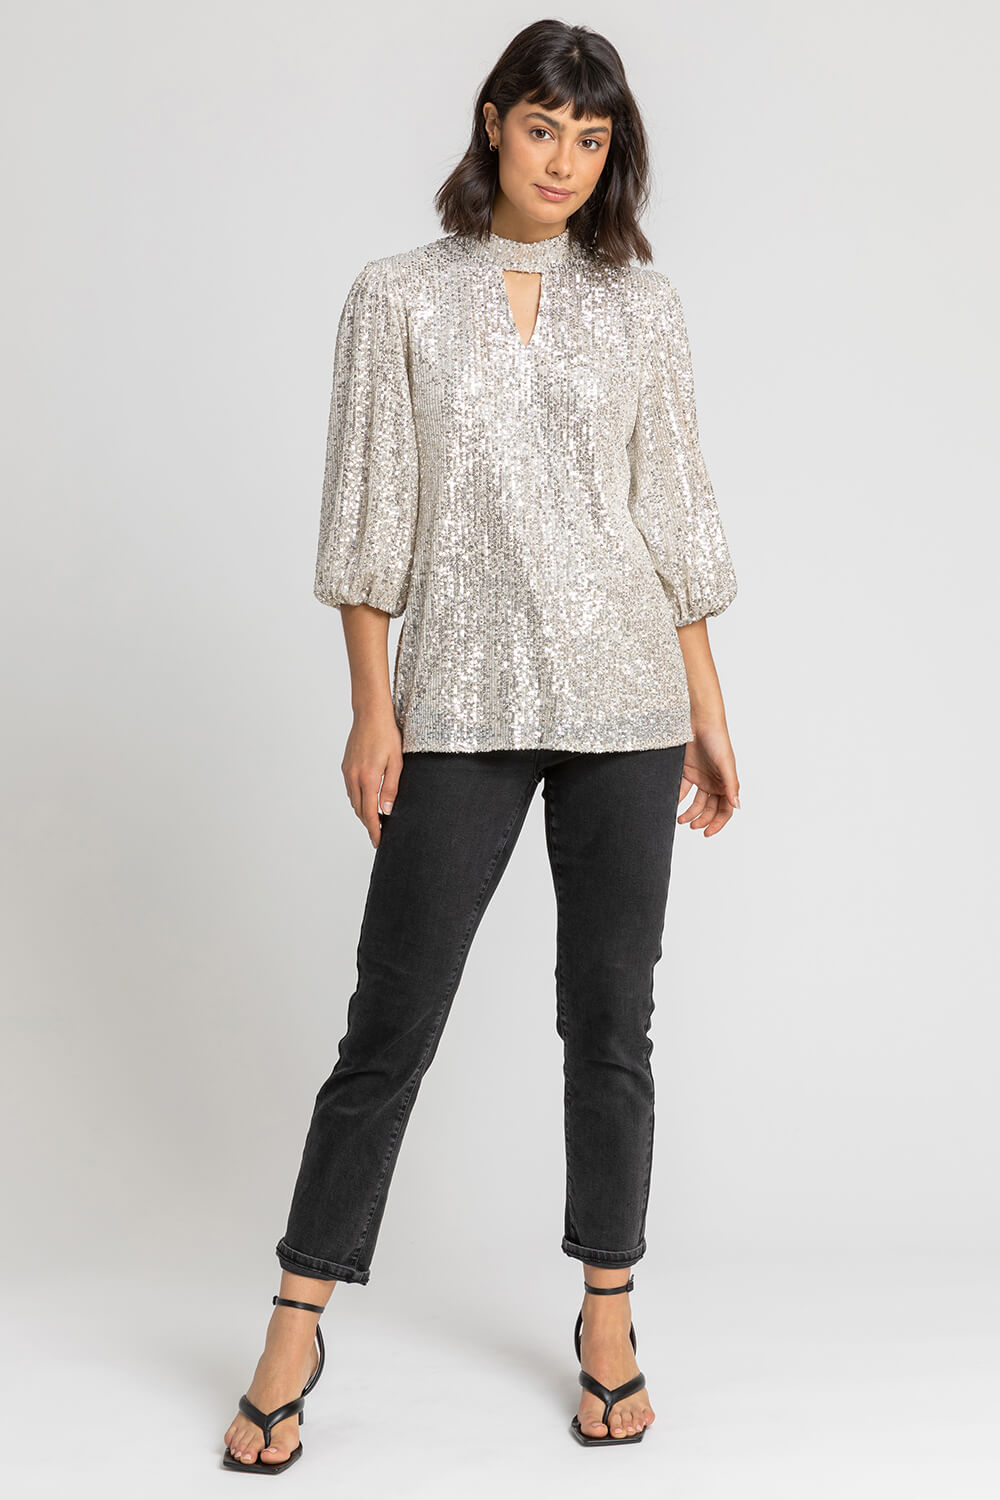 Silver Sequin Keyhole Neck Top, Image 3 of 4